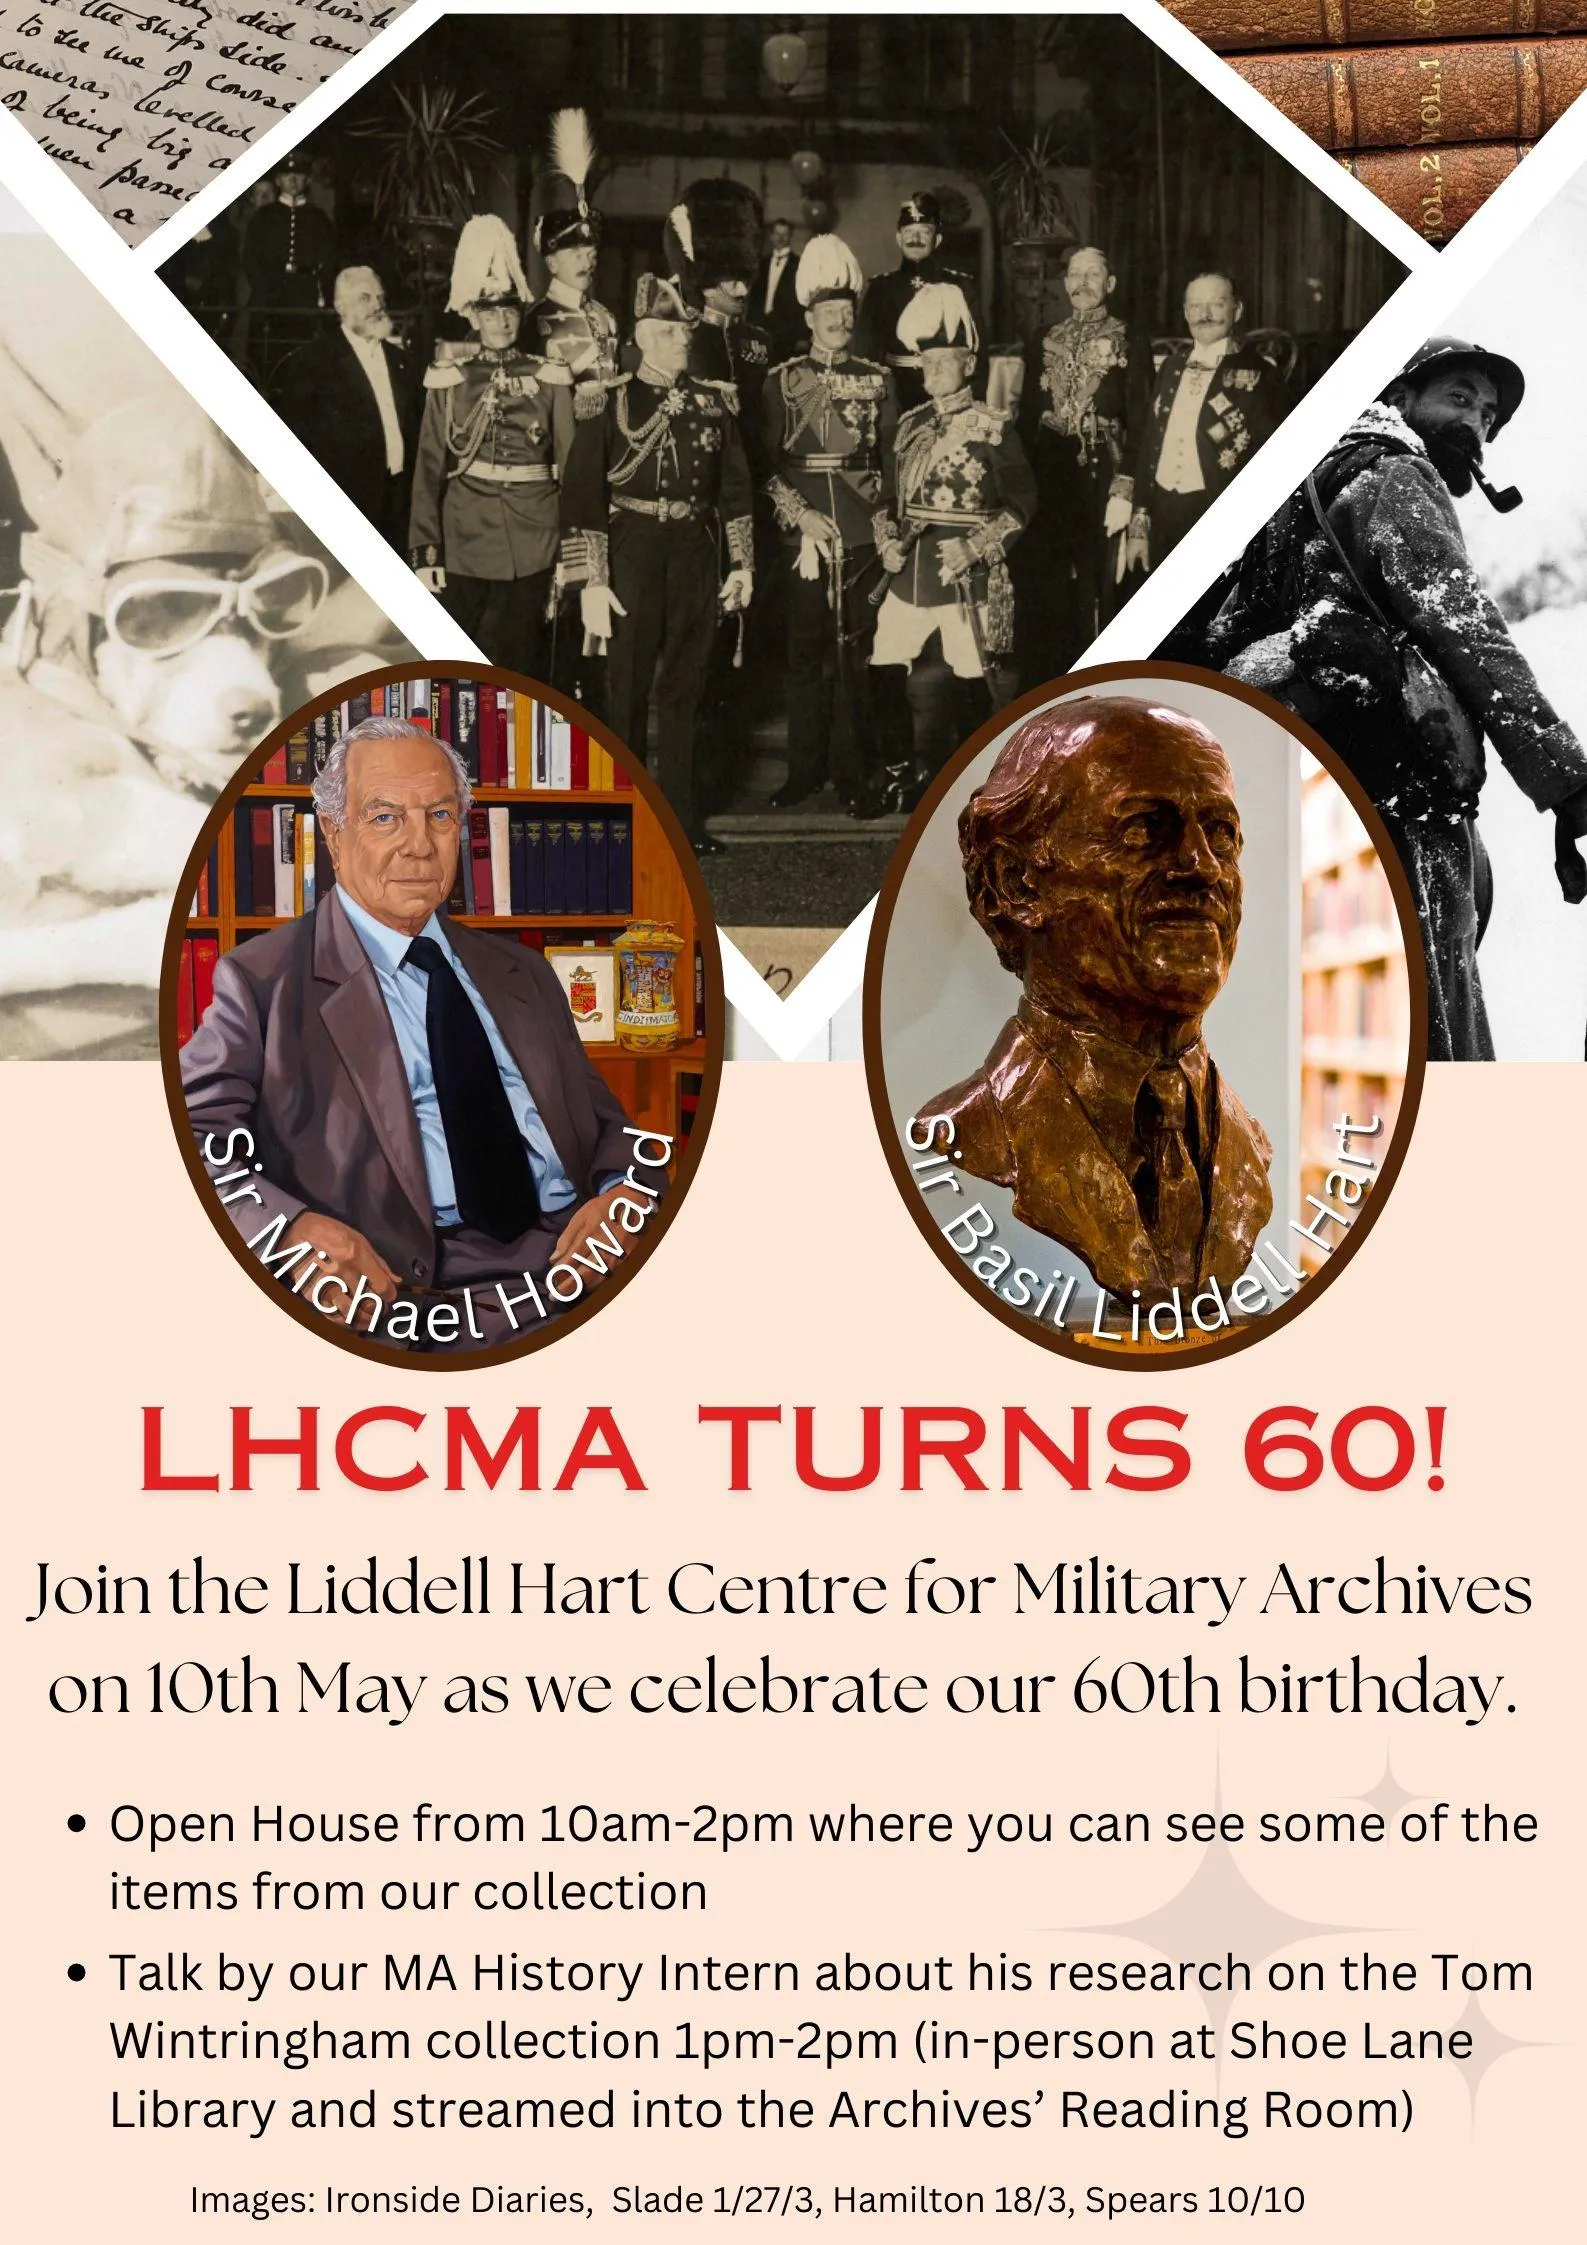 A poster for the LHCMA 60th Anniversary Event.